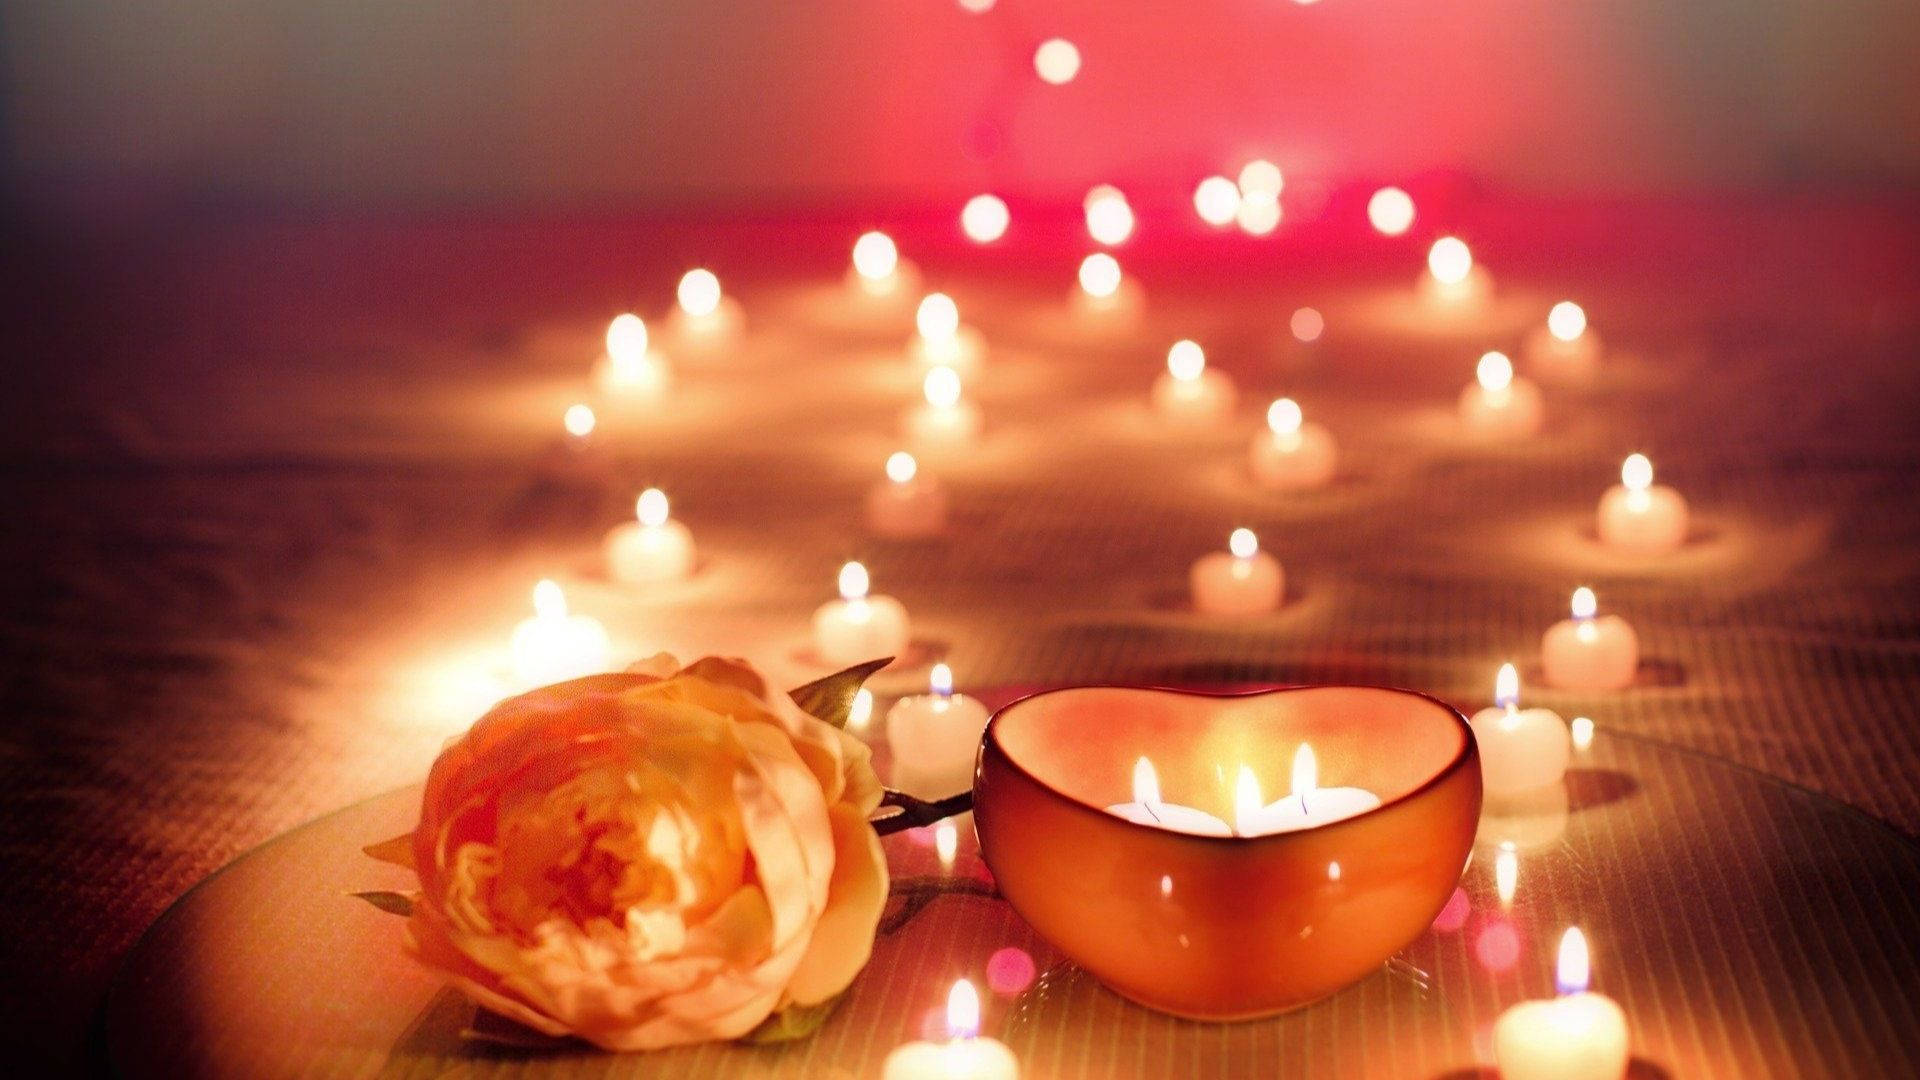 Romantic Candles Background